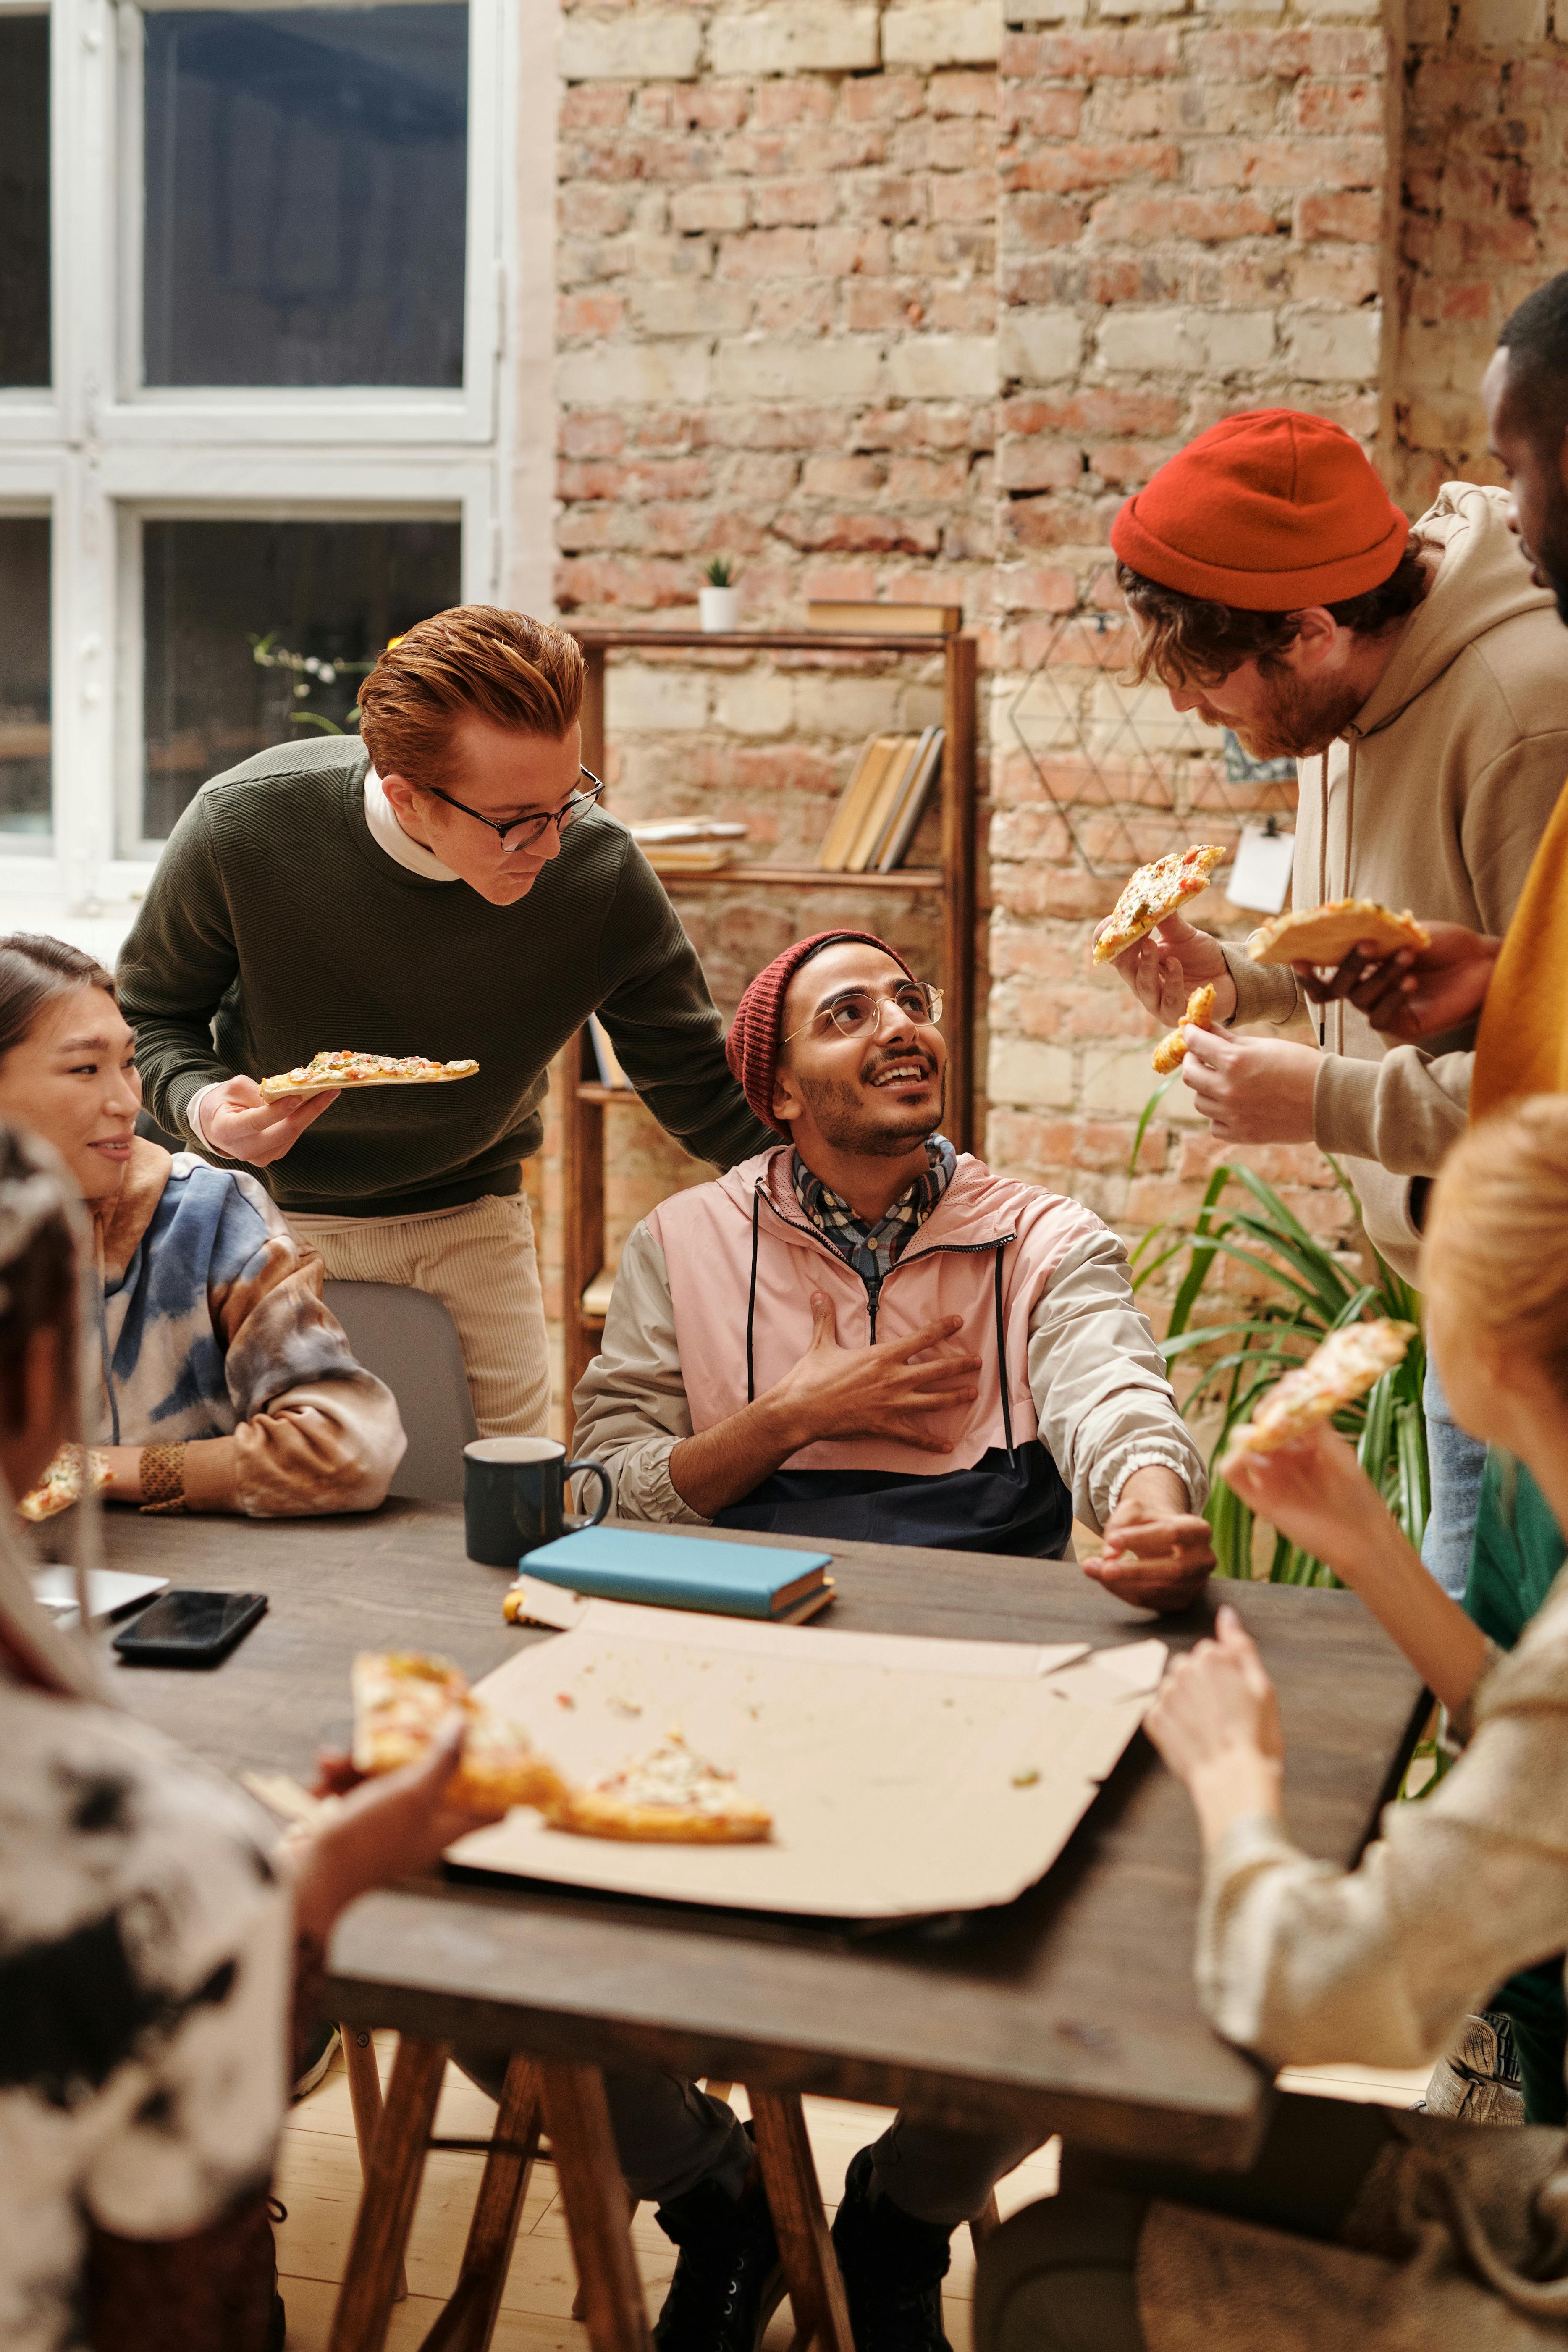 A group of friends eating and talking | Source: Pexels